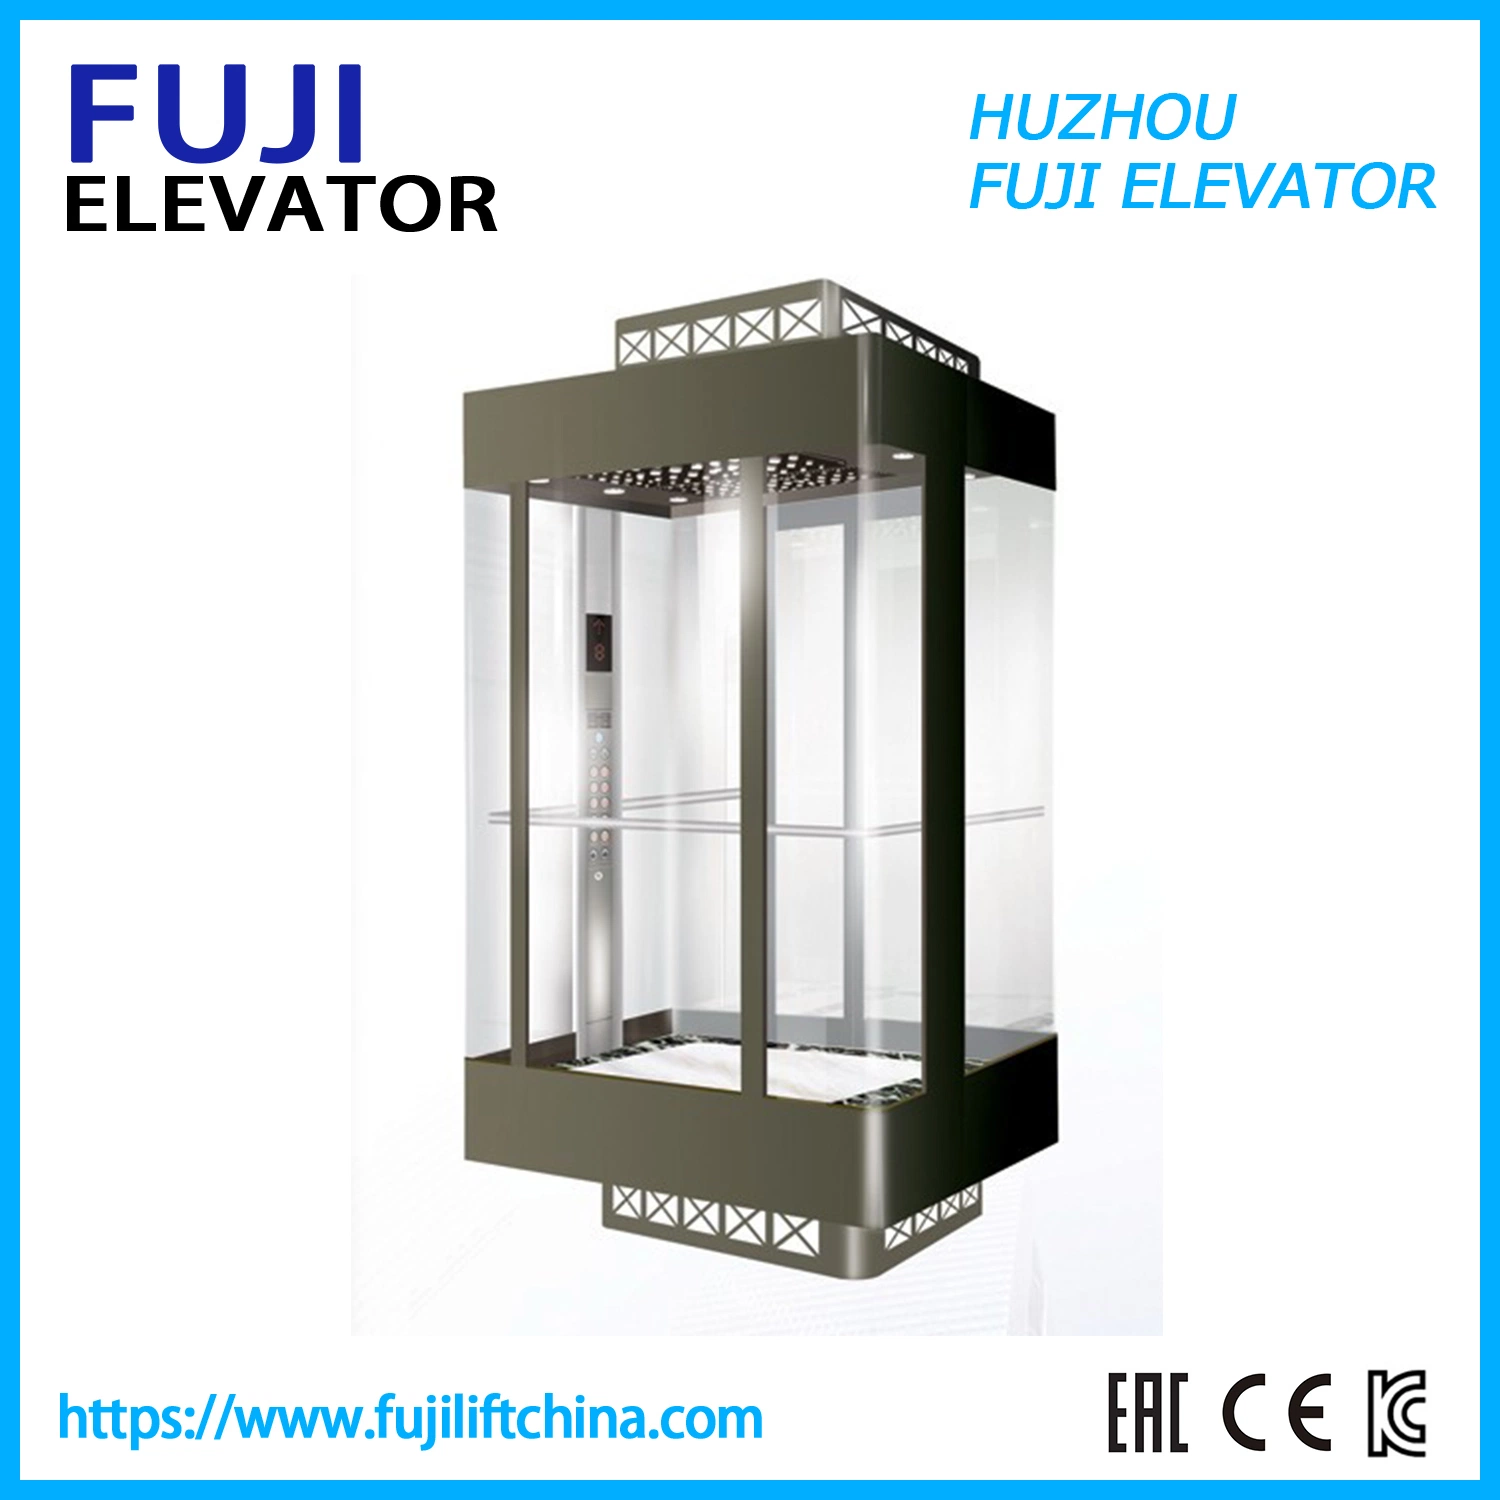 FUJI Factory Manufacturer Panoramic Lift Glass Elevator with Sightseeing Elevator Home Elevator Villa Passenger Lift Passenger Elevator Lift China Lift